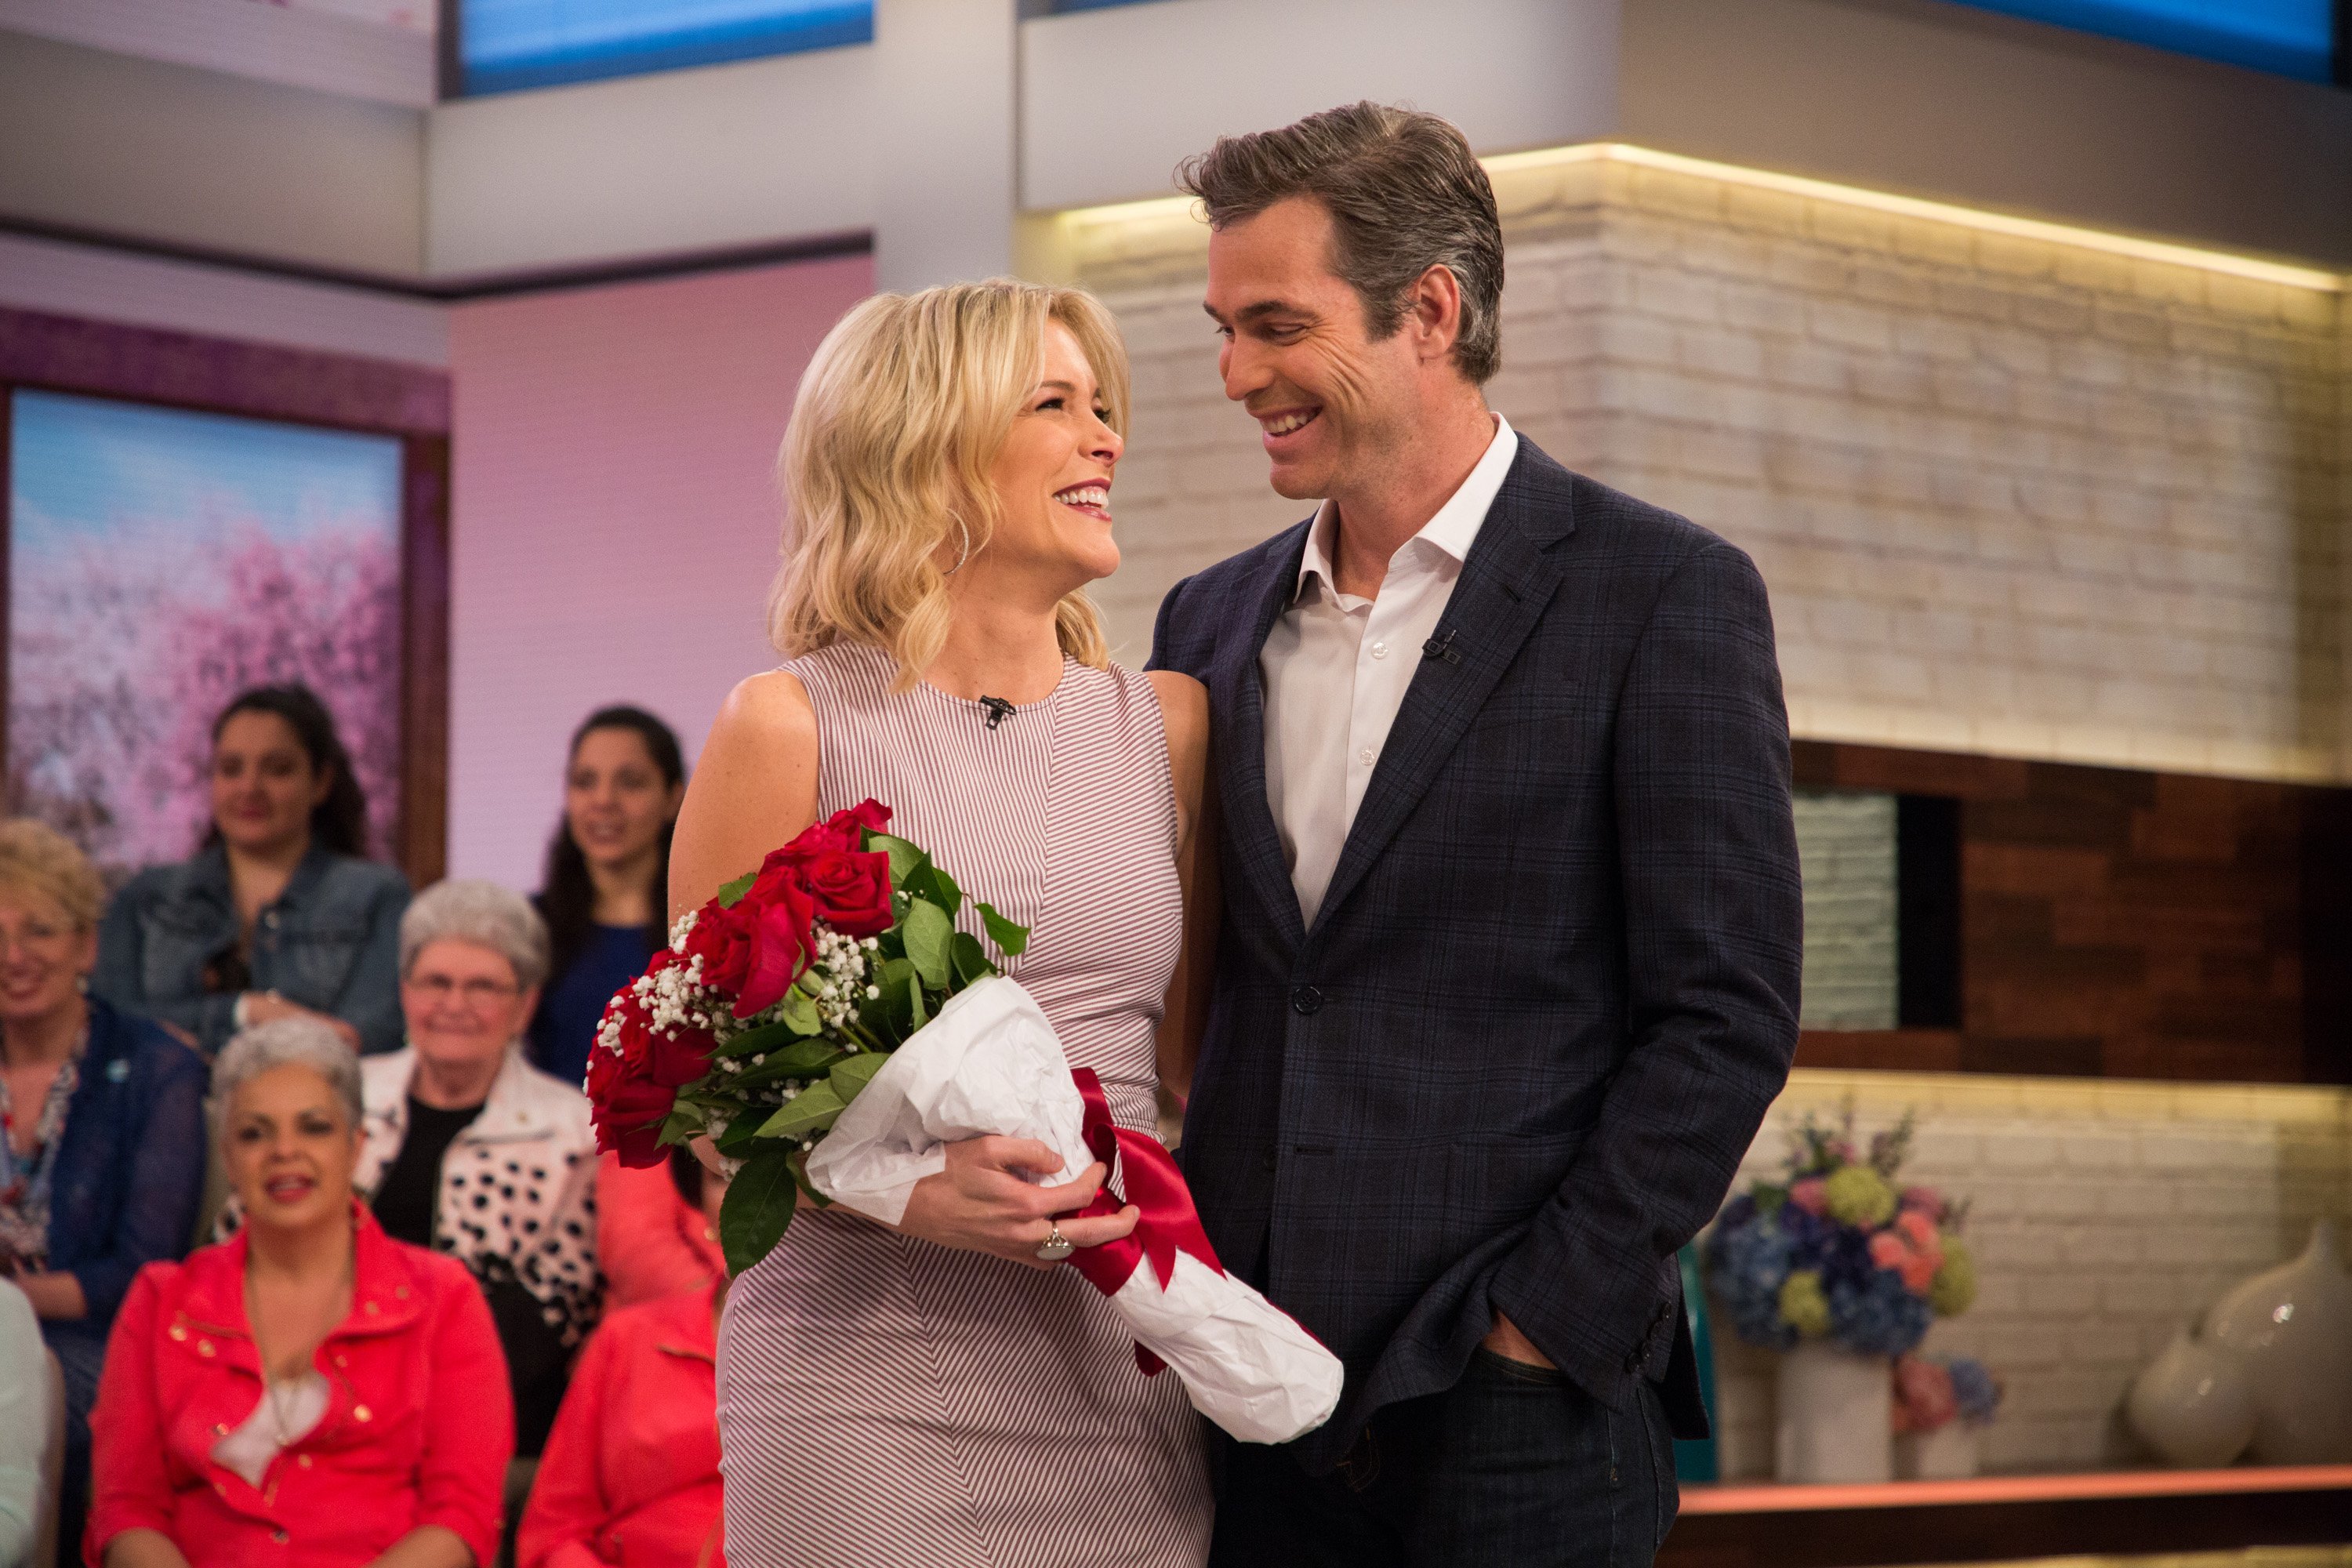 Megyn Kelly and Doug Brunt stand next to each other while she holds a bouquet of flowers and smiles.